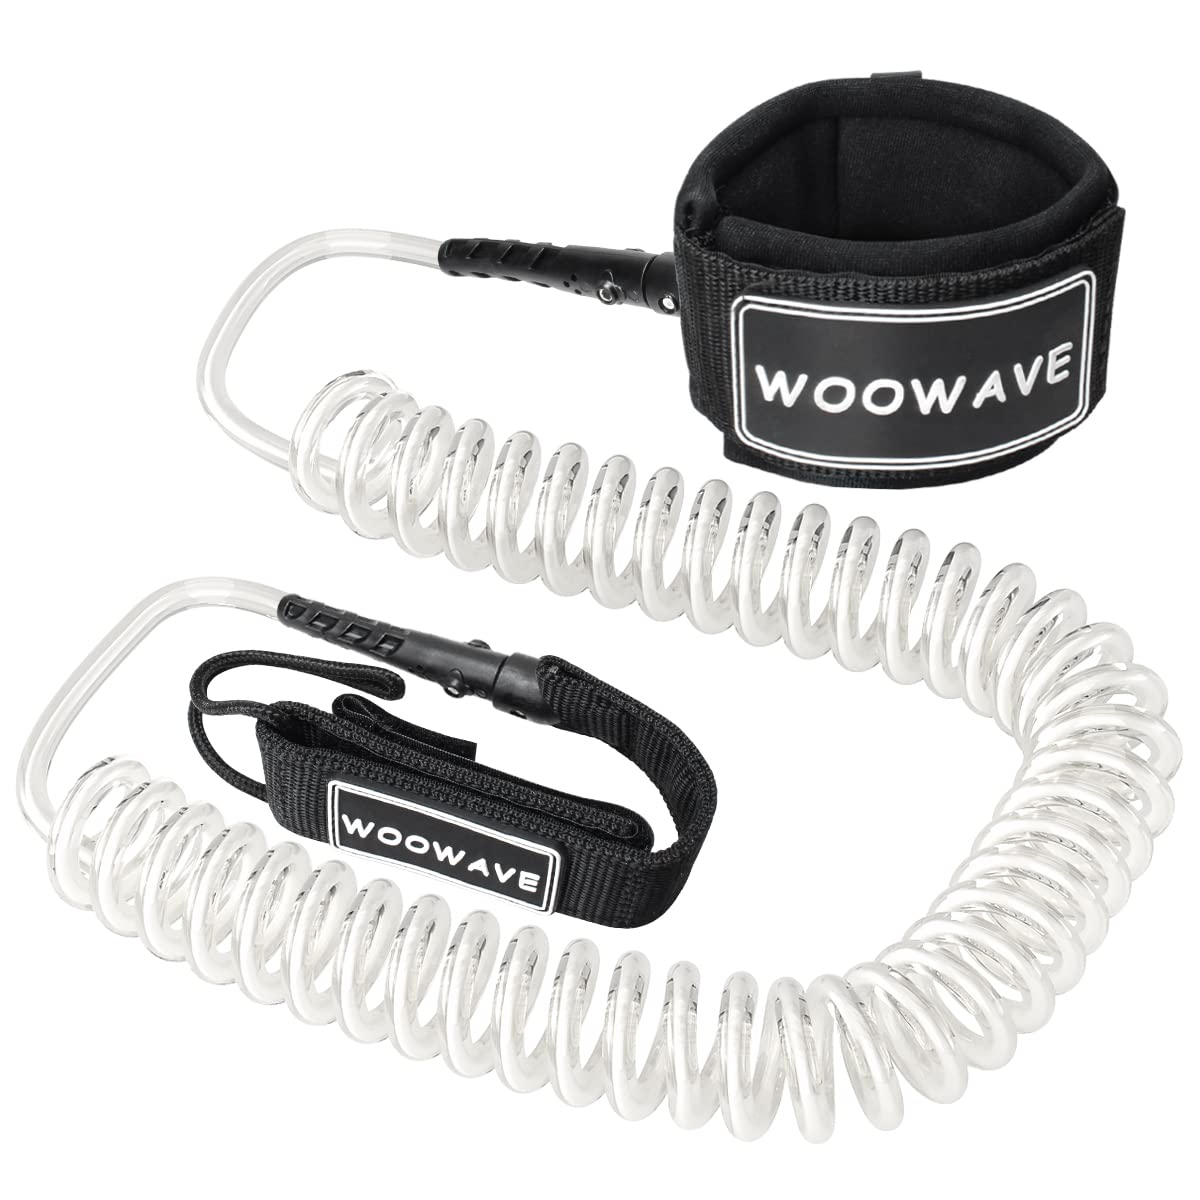 WOOWAVE SUP Leash Premium Stand Up Paddle Board Surfboard Leash Coiled 8/10 feet Stay on Board with Waterproof Wallet/Phone Case